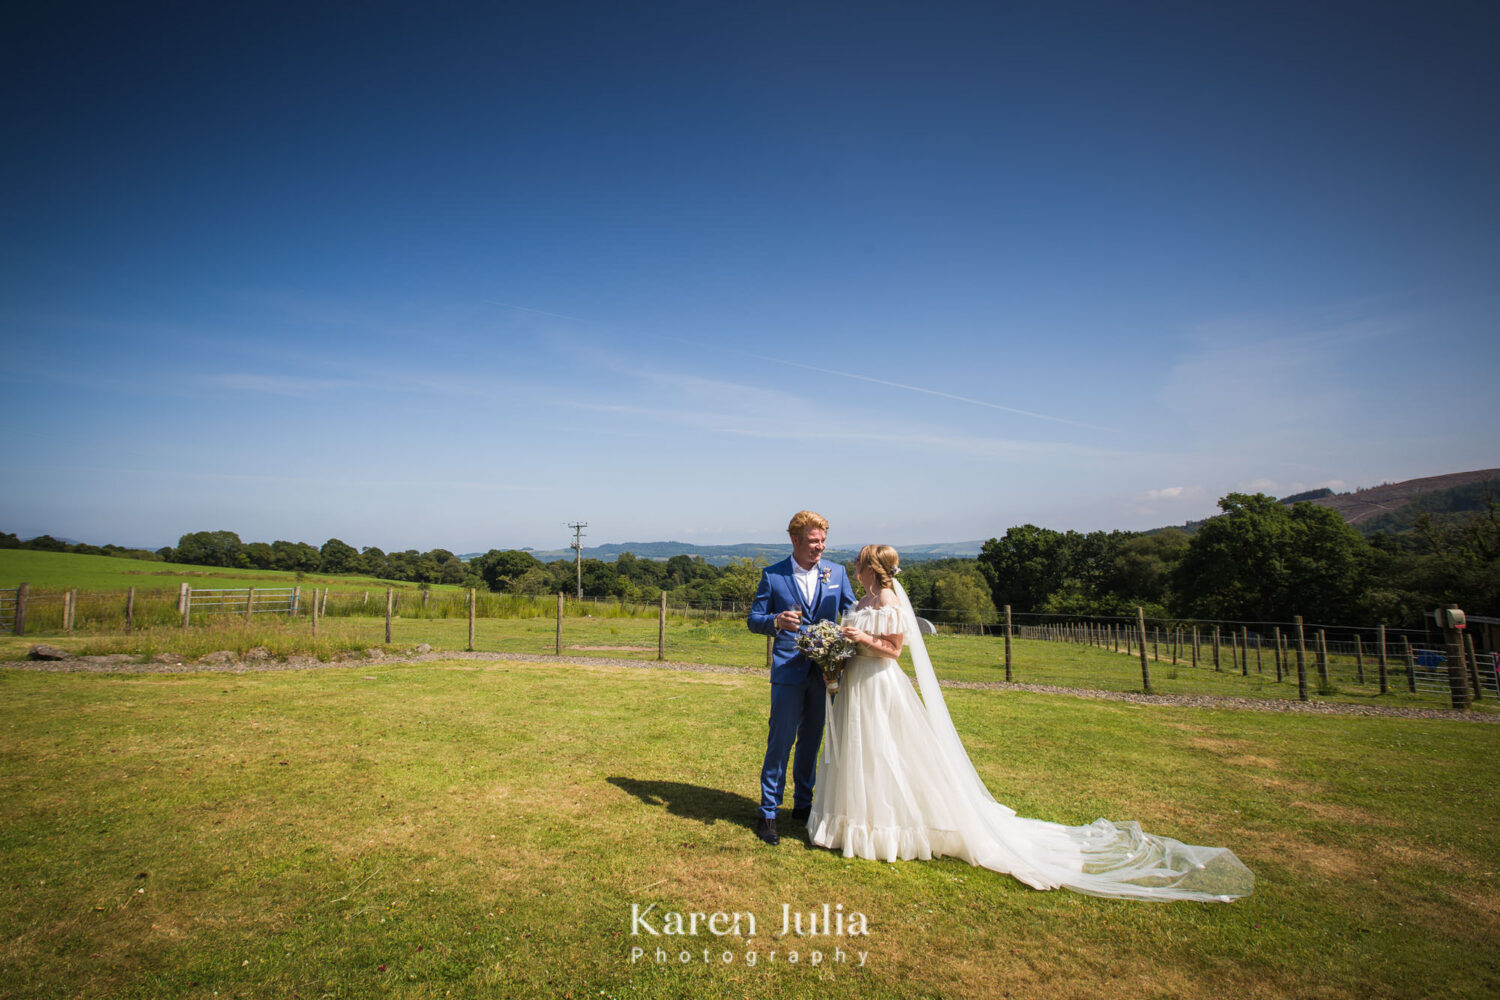 bride and groom wedding day portrait at Fruin Farm, with Loch Lomond in the background